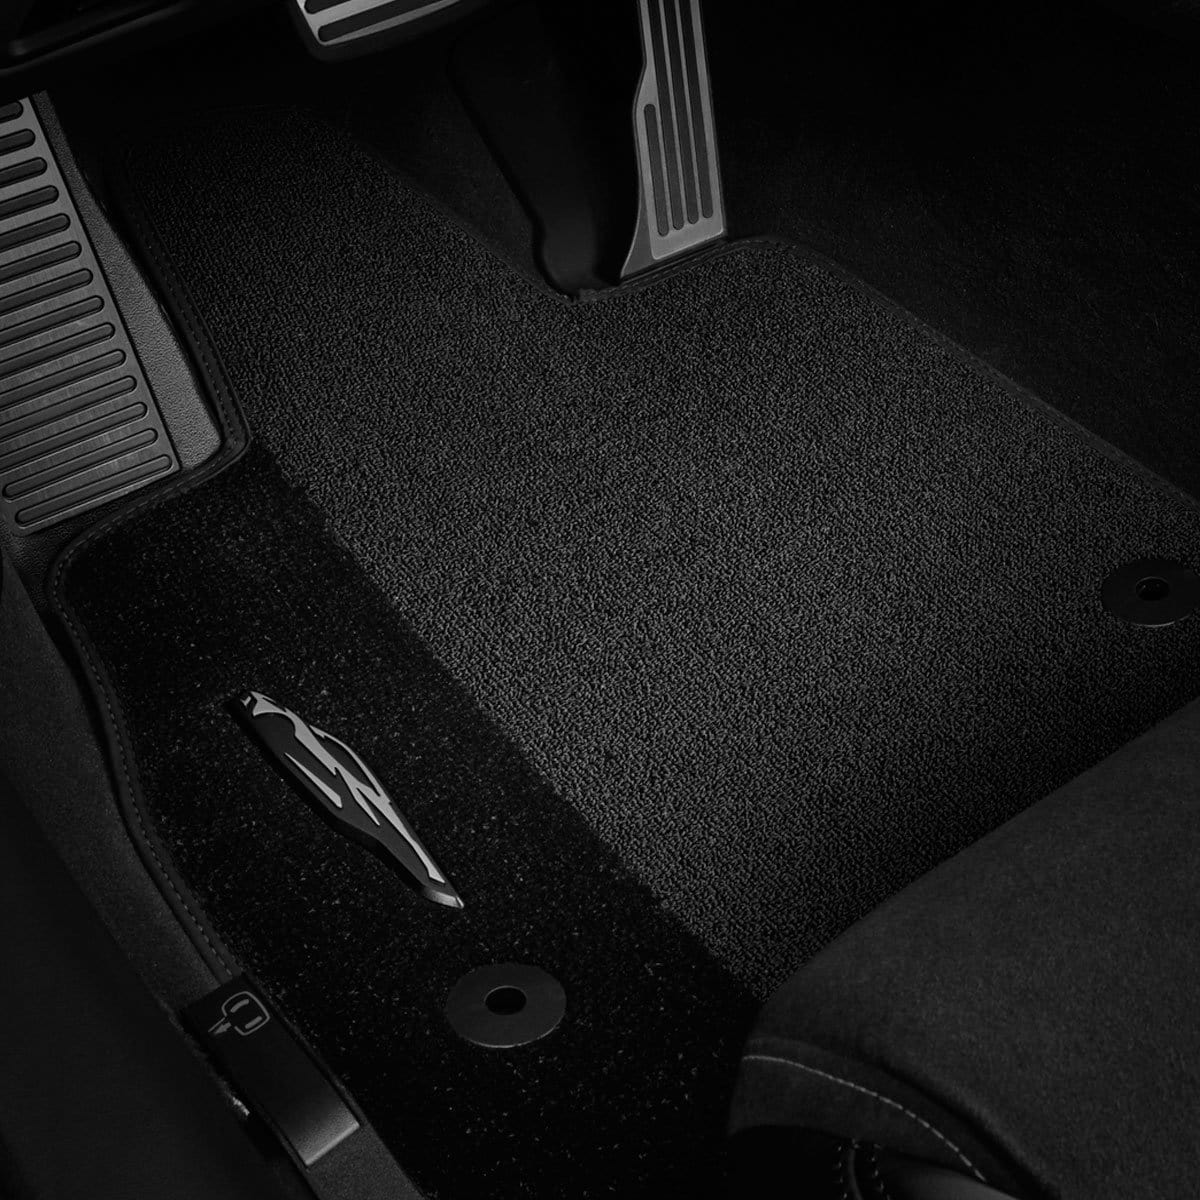 Black C8 Carpeted Floor Mats with Corvette Silhouette, SKU 50-4-029, protecting car interior from debris and wear and tear.